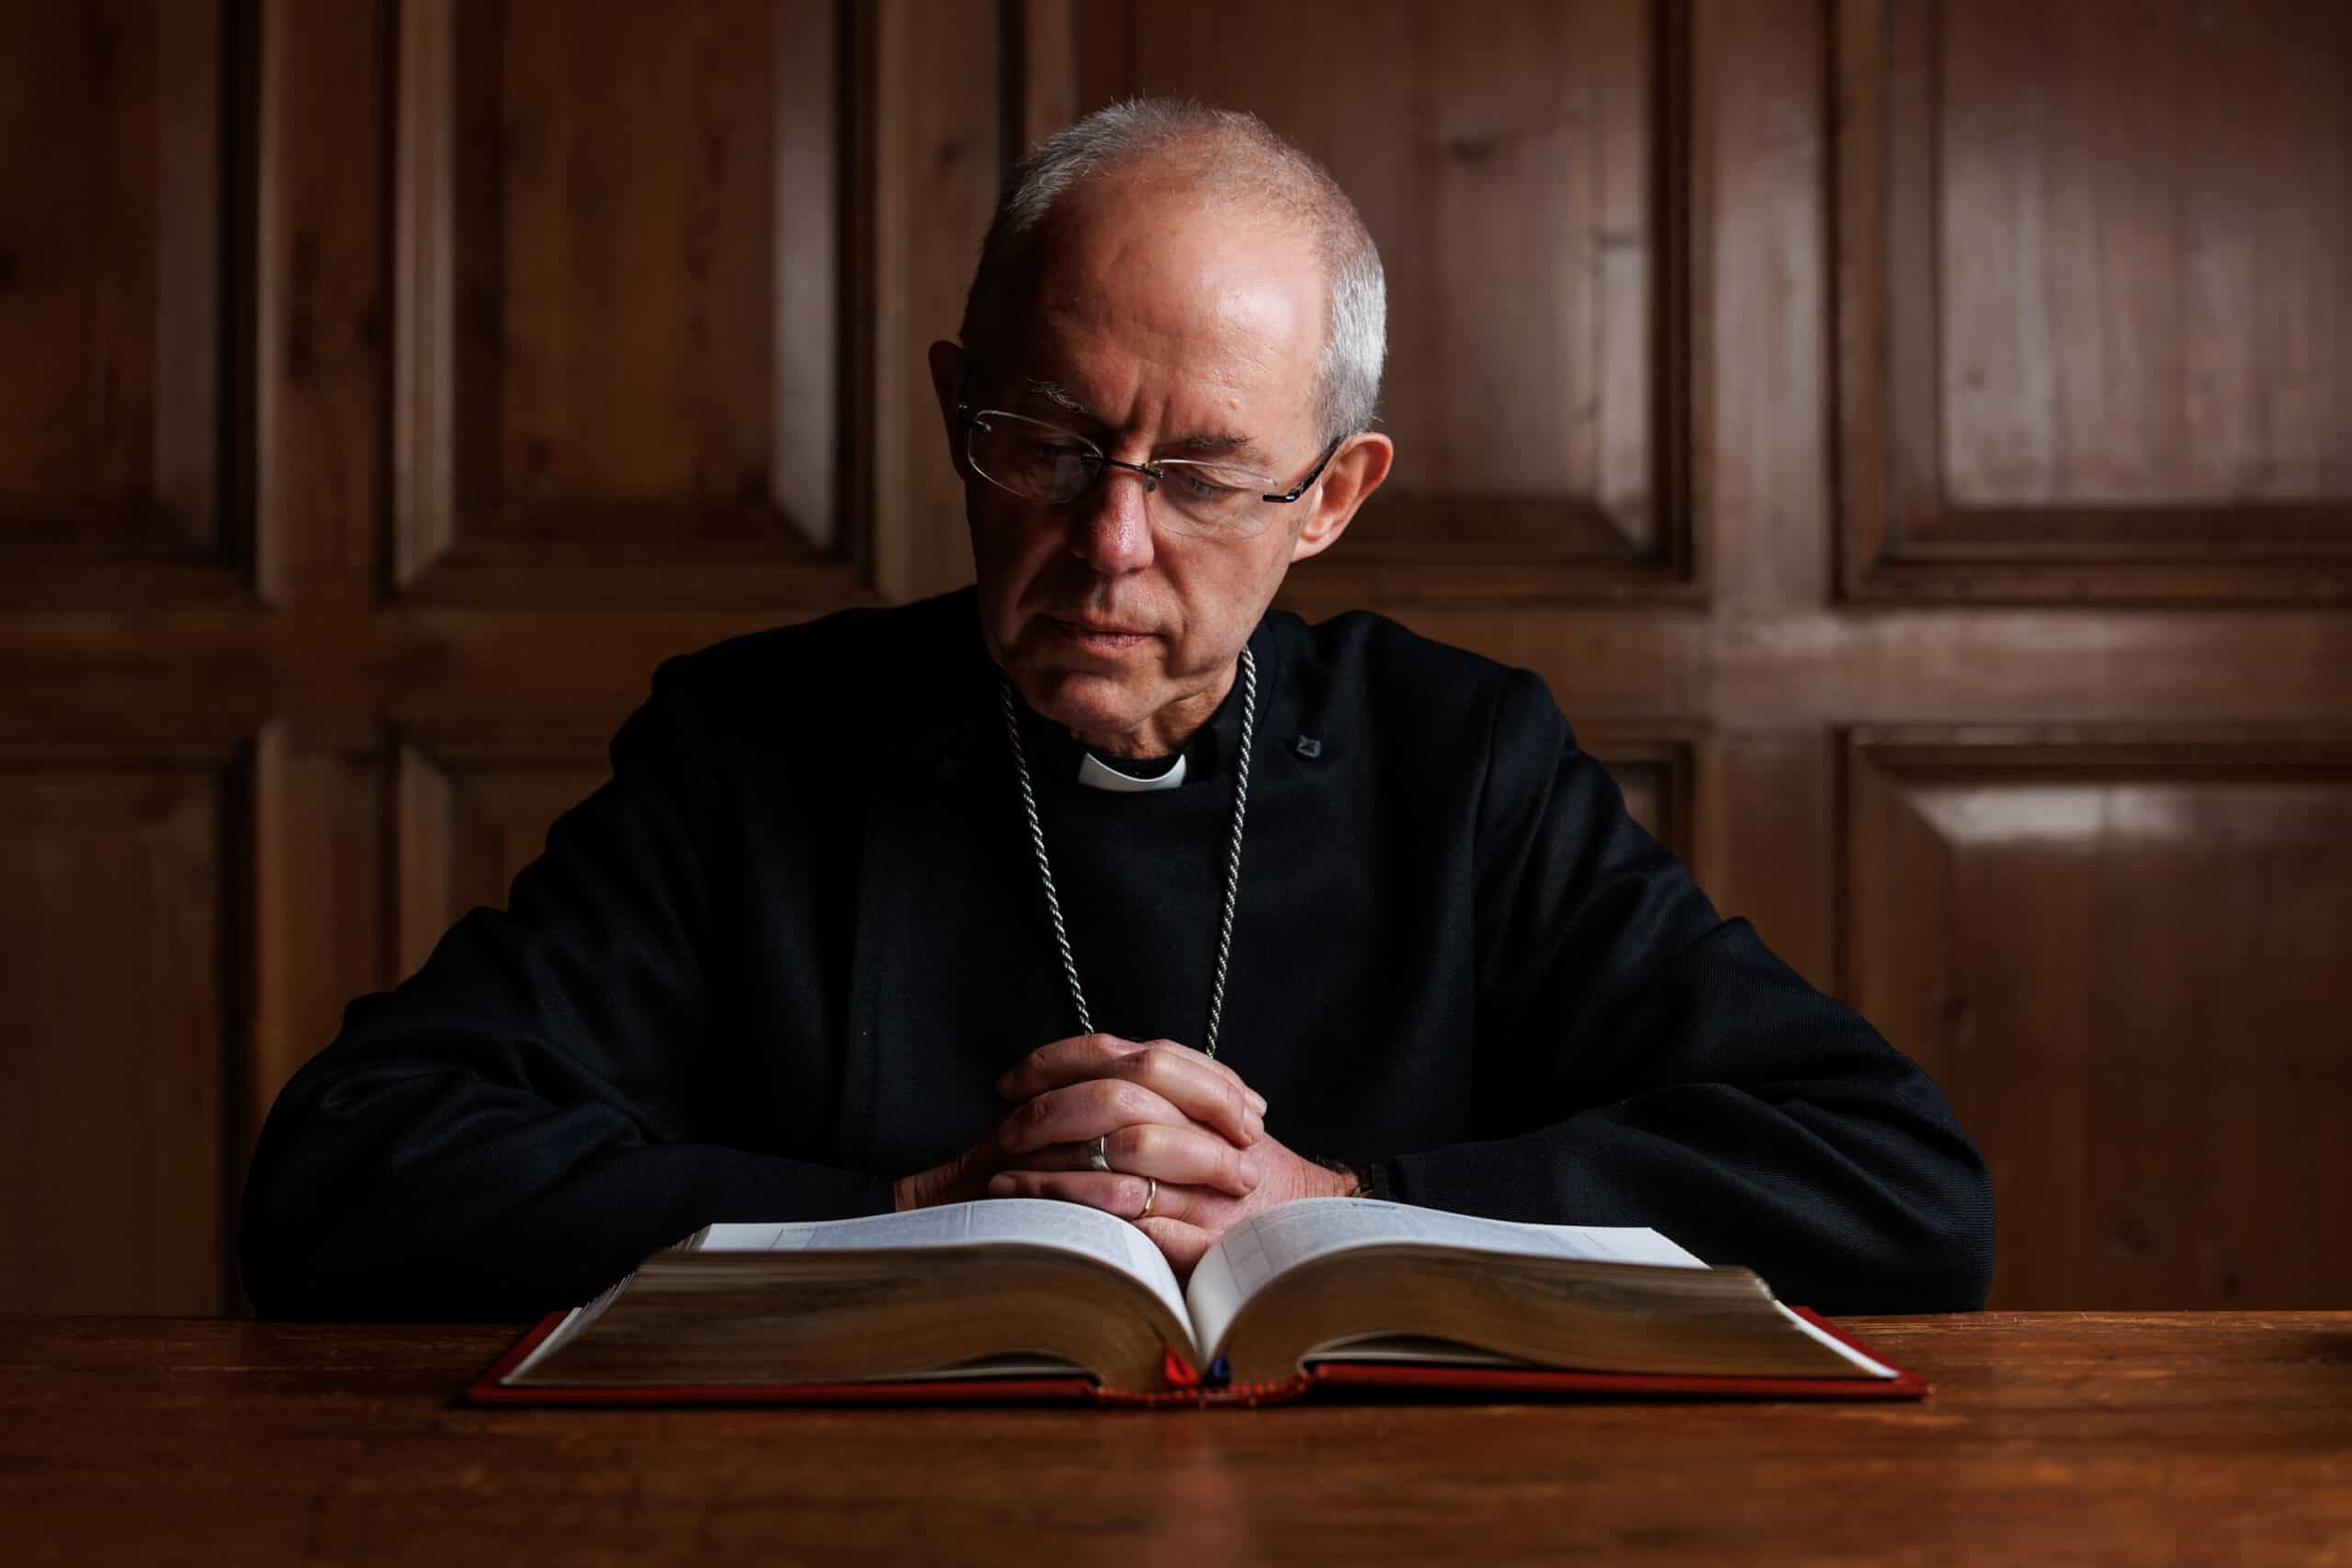 Justin Welby set for historic intervention in House of Lords over government’s Rwanda plans